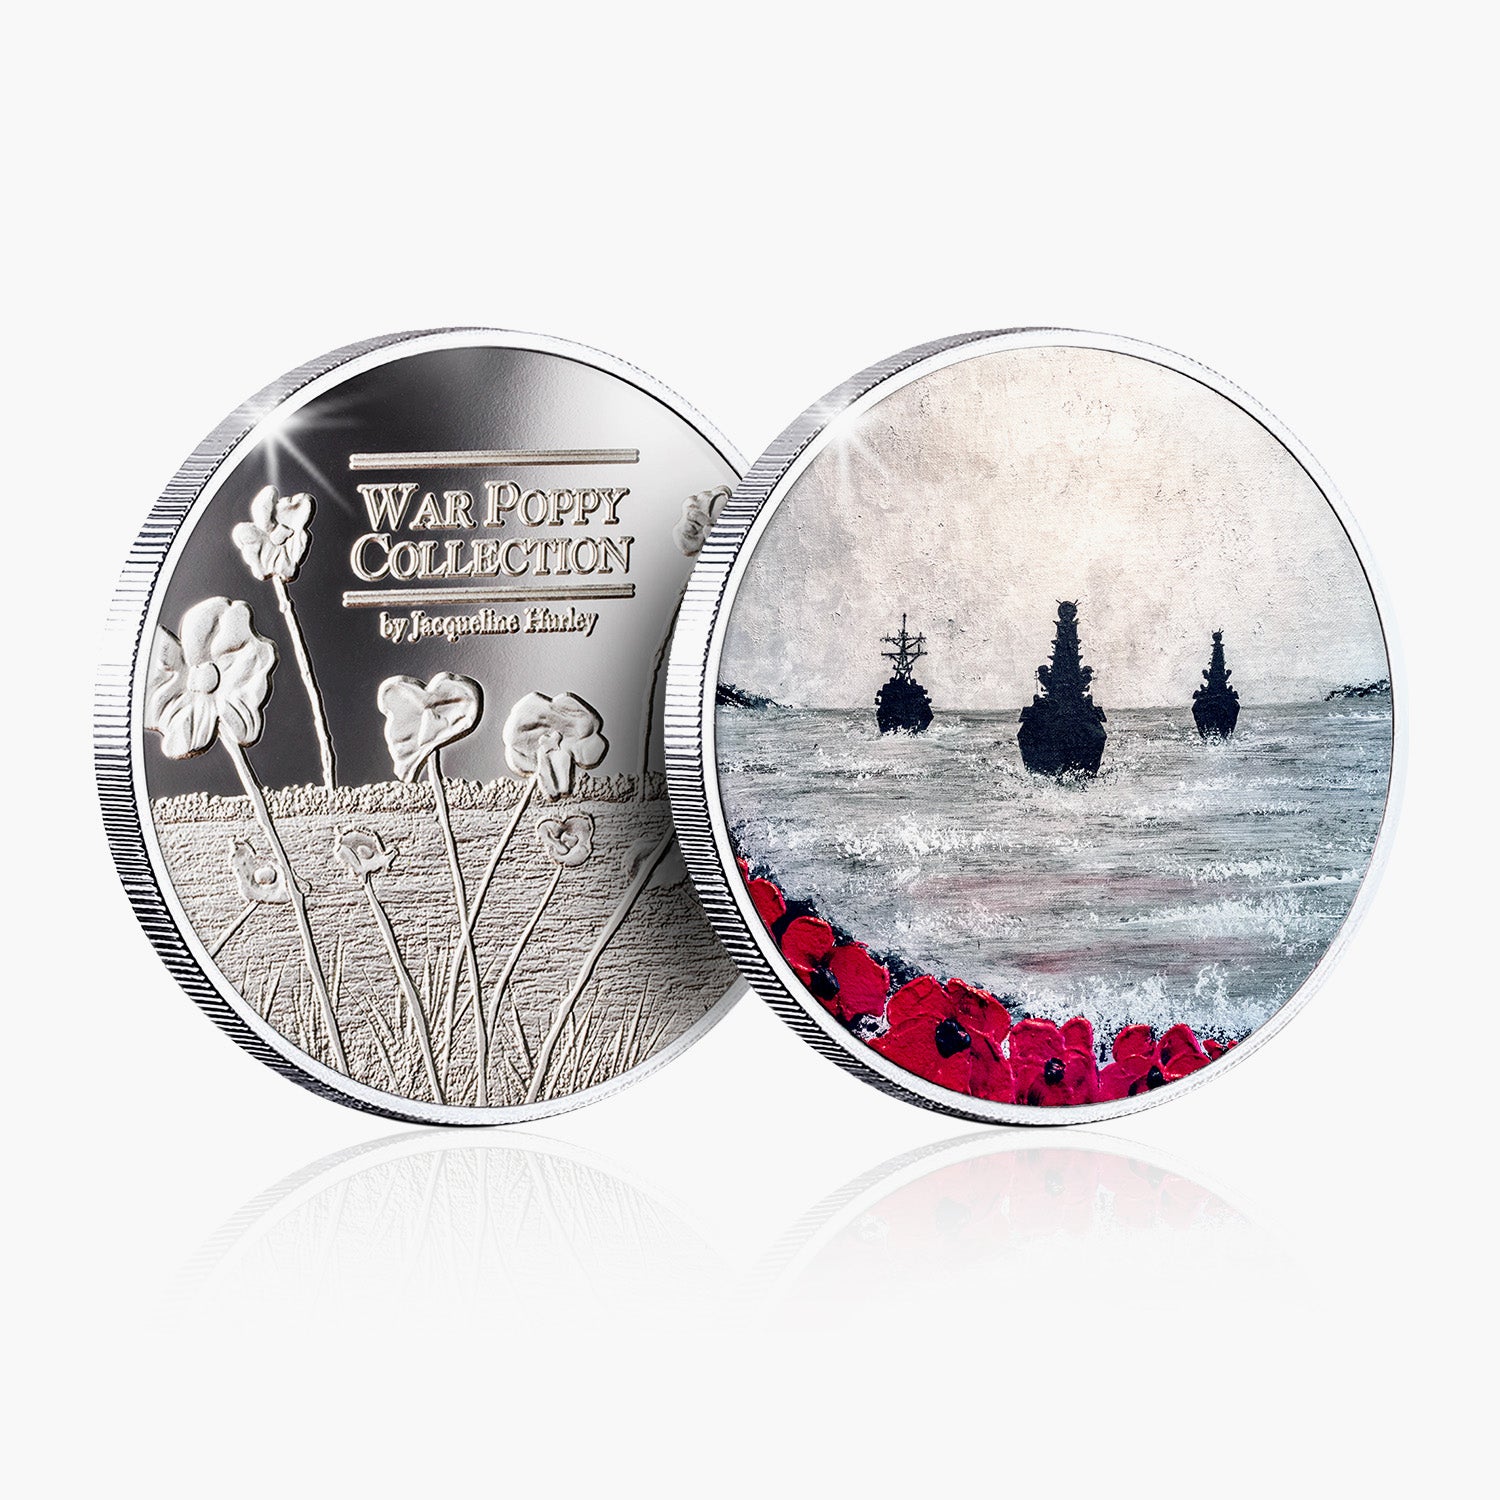 Anchored in Remembrance Silver-Plated Commemorative